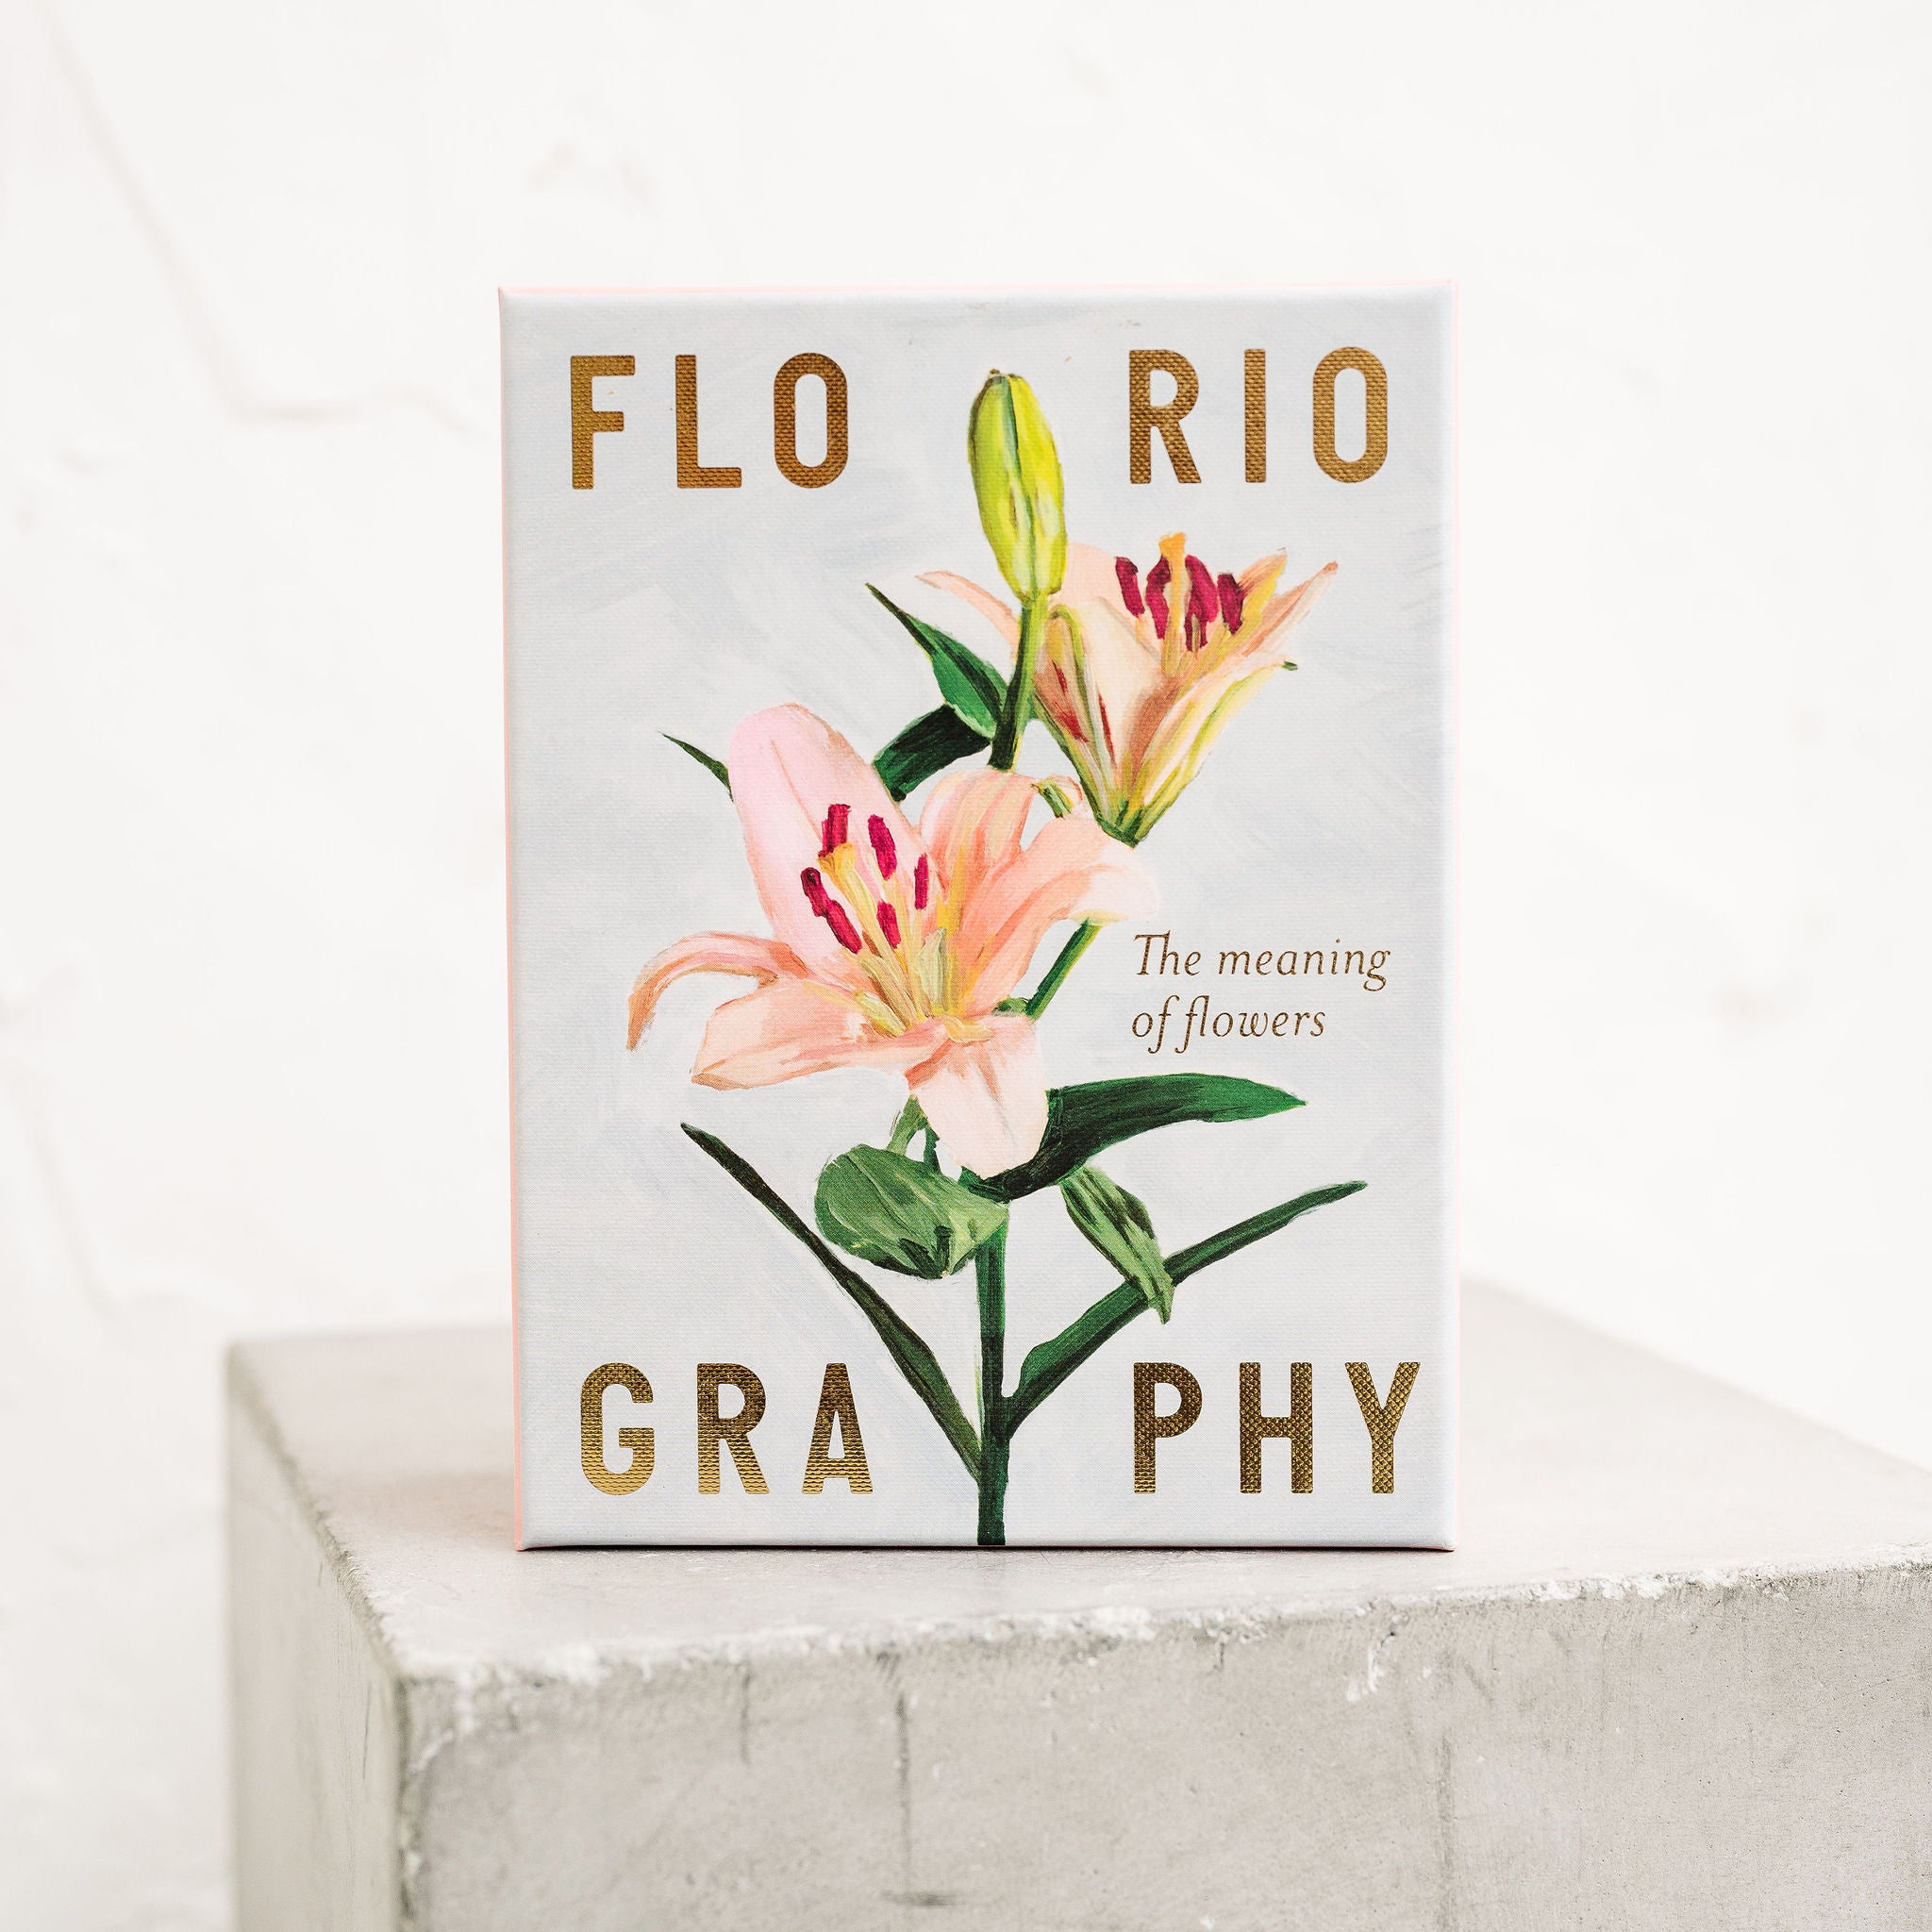 Floriography: The Meaning Of Flowers